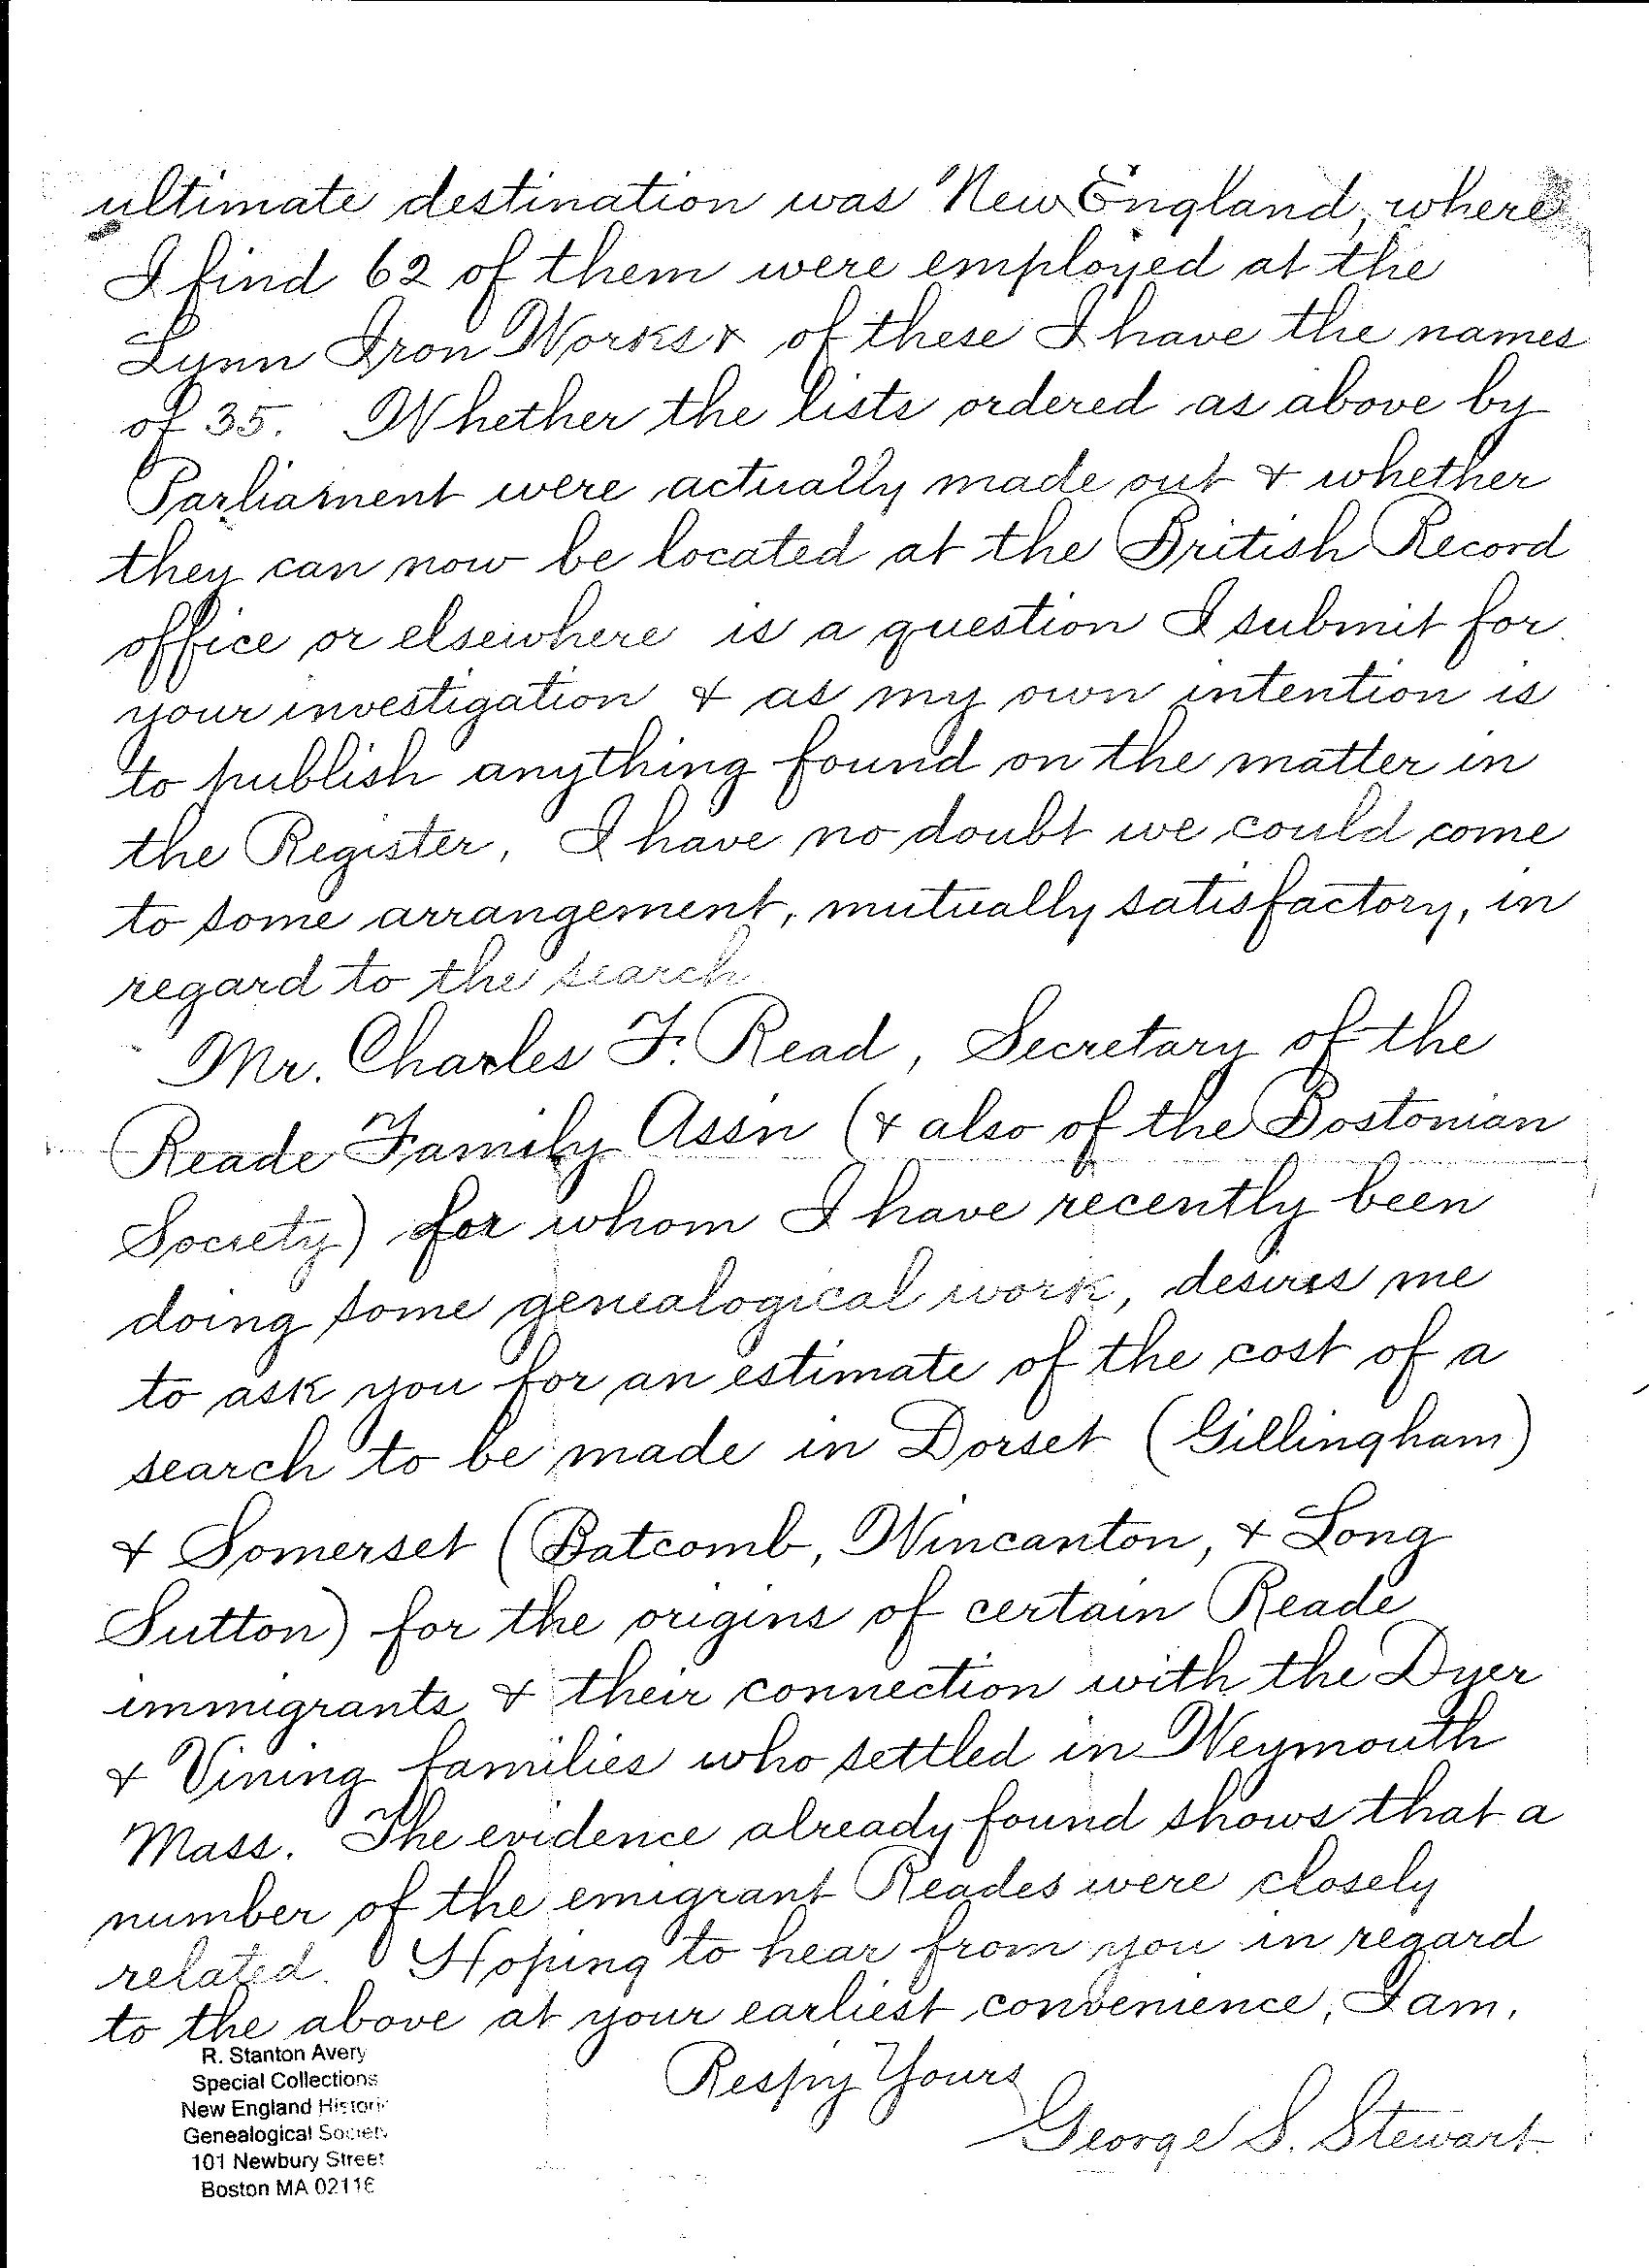 Page 2 of George Sawin's letter to Elizabeth French